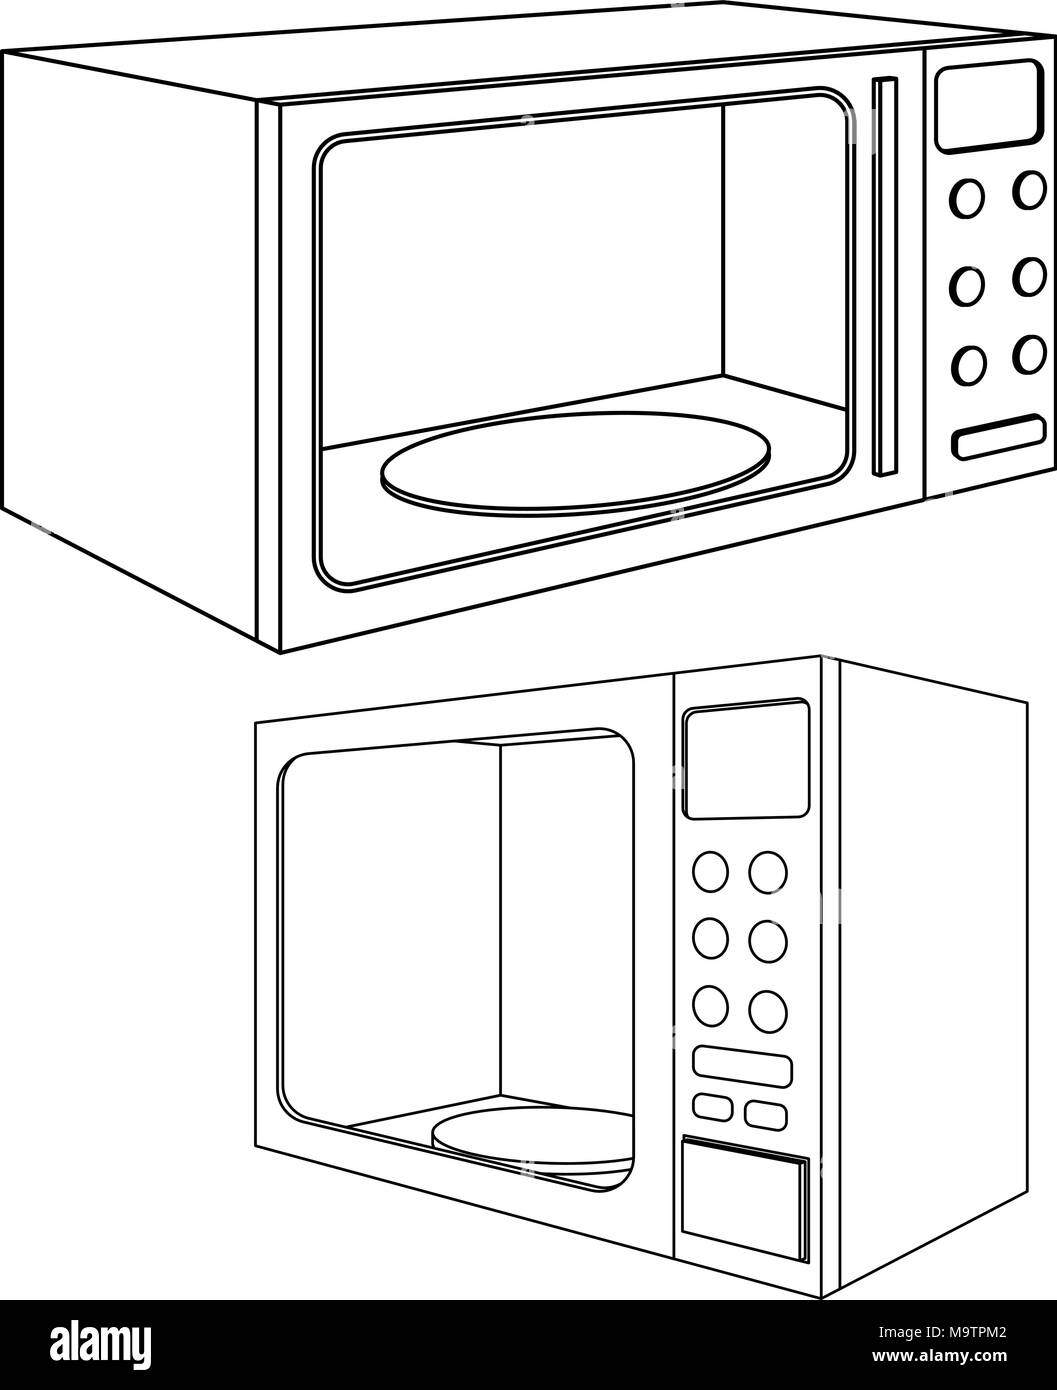 15133 Oven Drawing Images Stock Photos  Vectors  Shutterstock